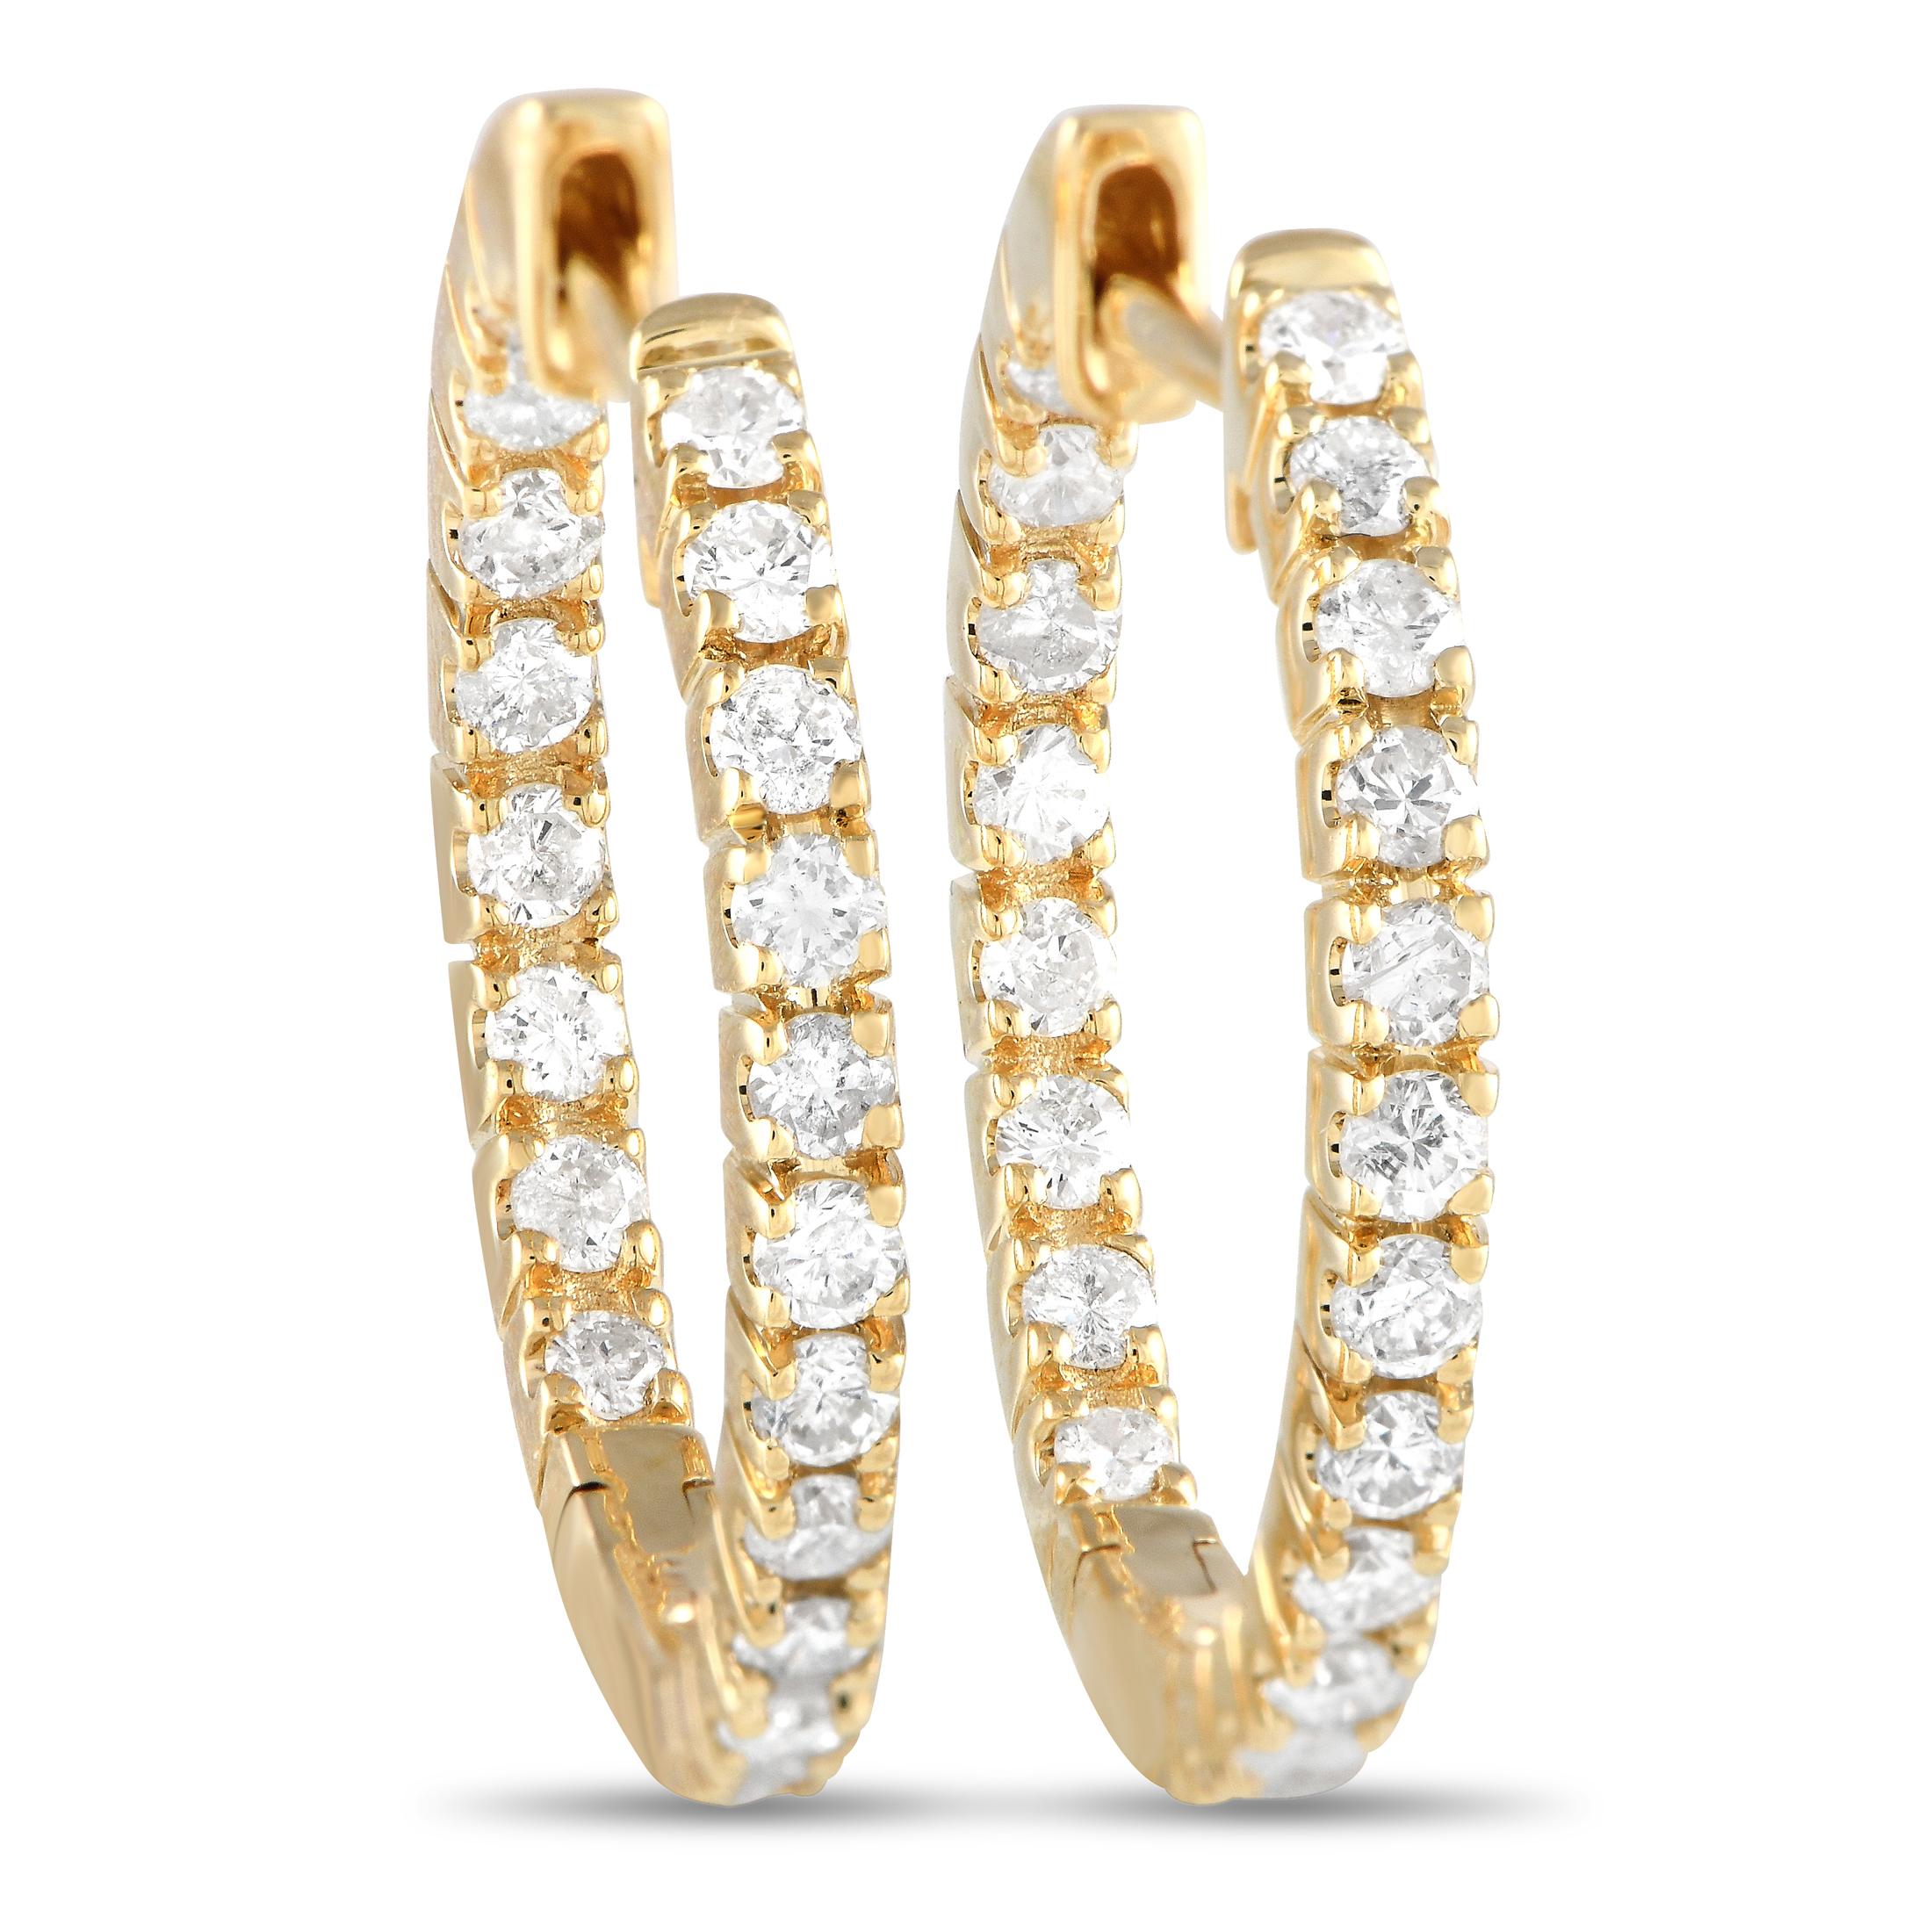 LB Exclusive 14K Yellow Gold 0.81 Carat Diamond Inside-Out Hoop Earrings In New Condition For Sale In Southampton, PA